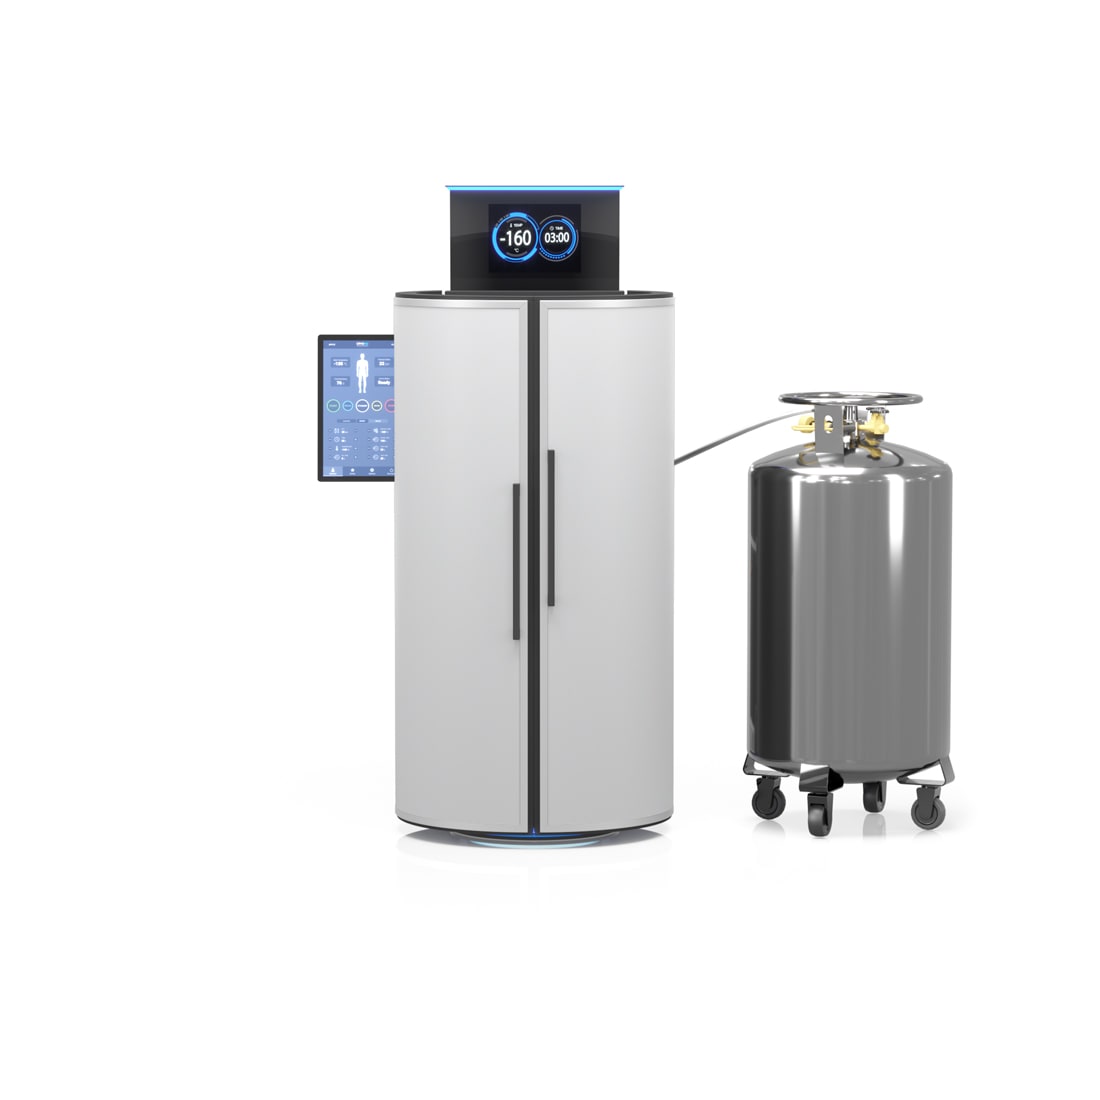 Cryotherapy machine with pressurized tank vessel